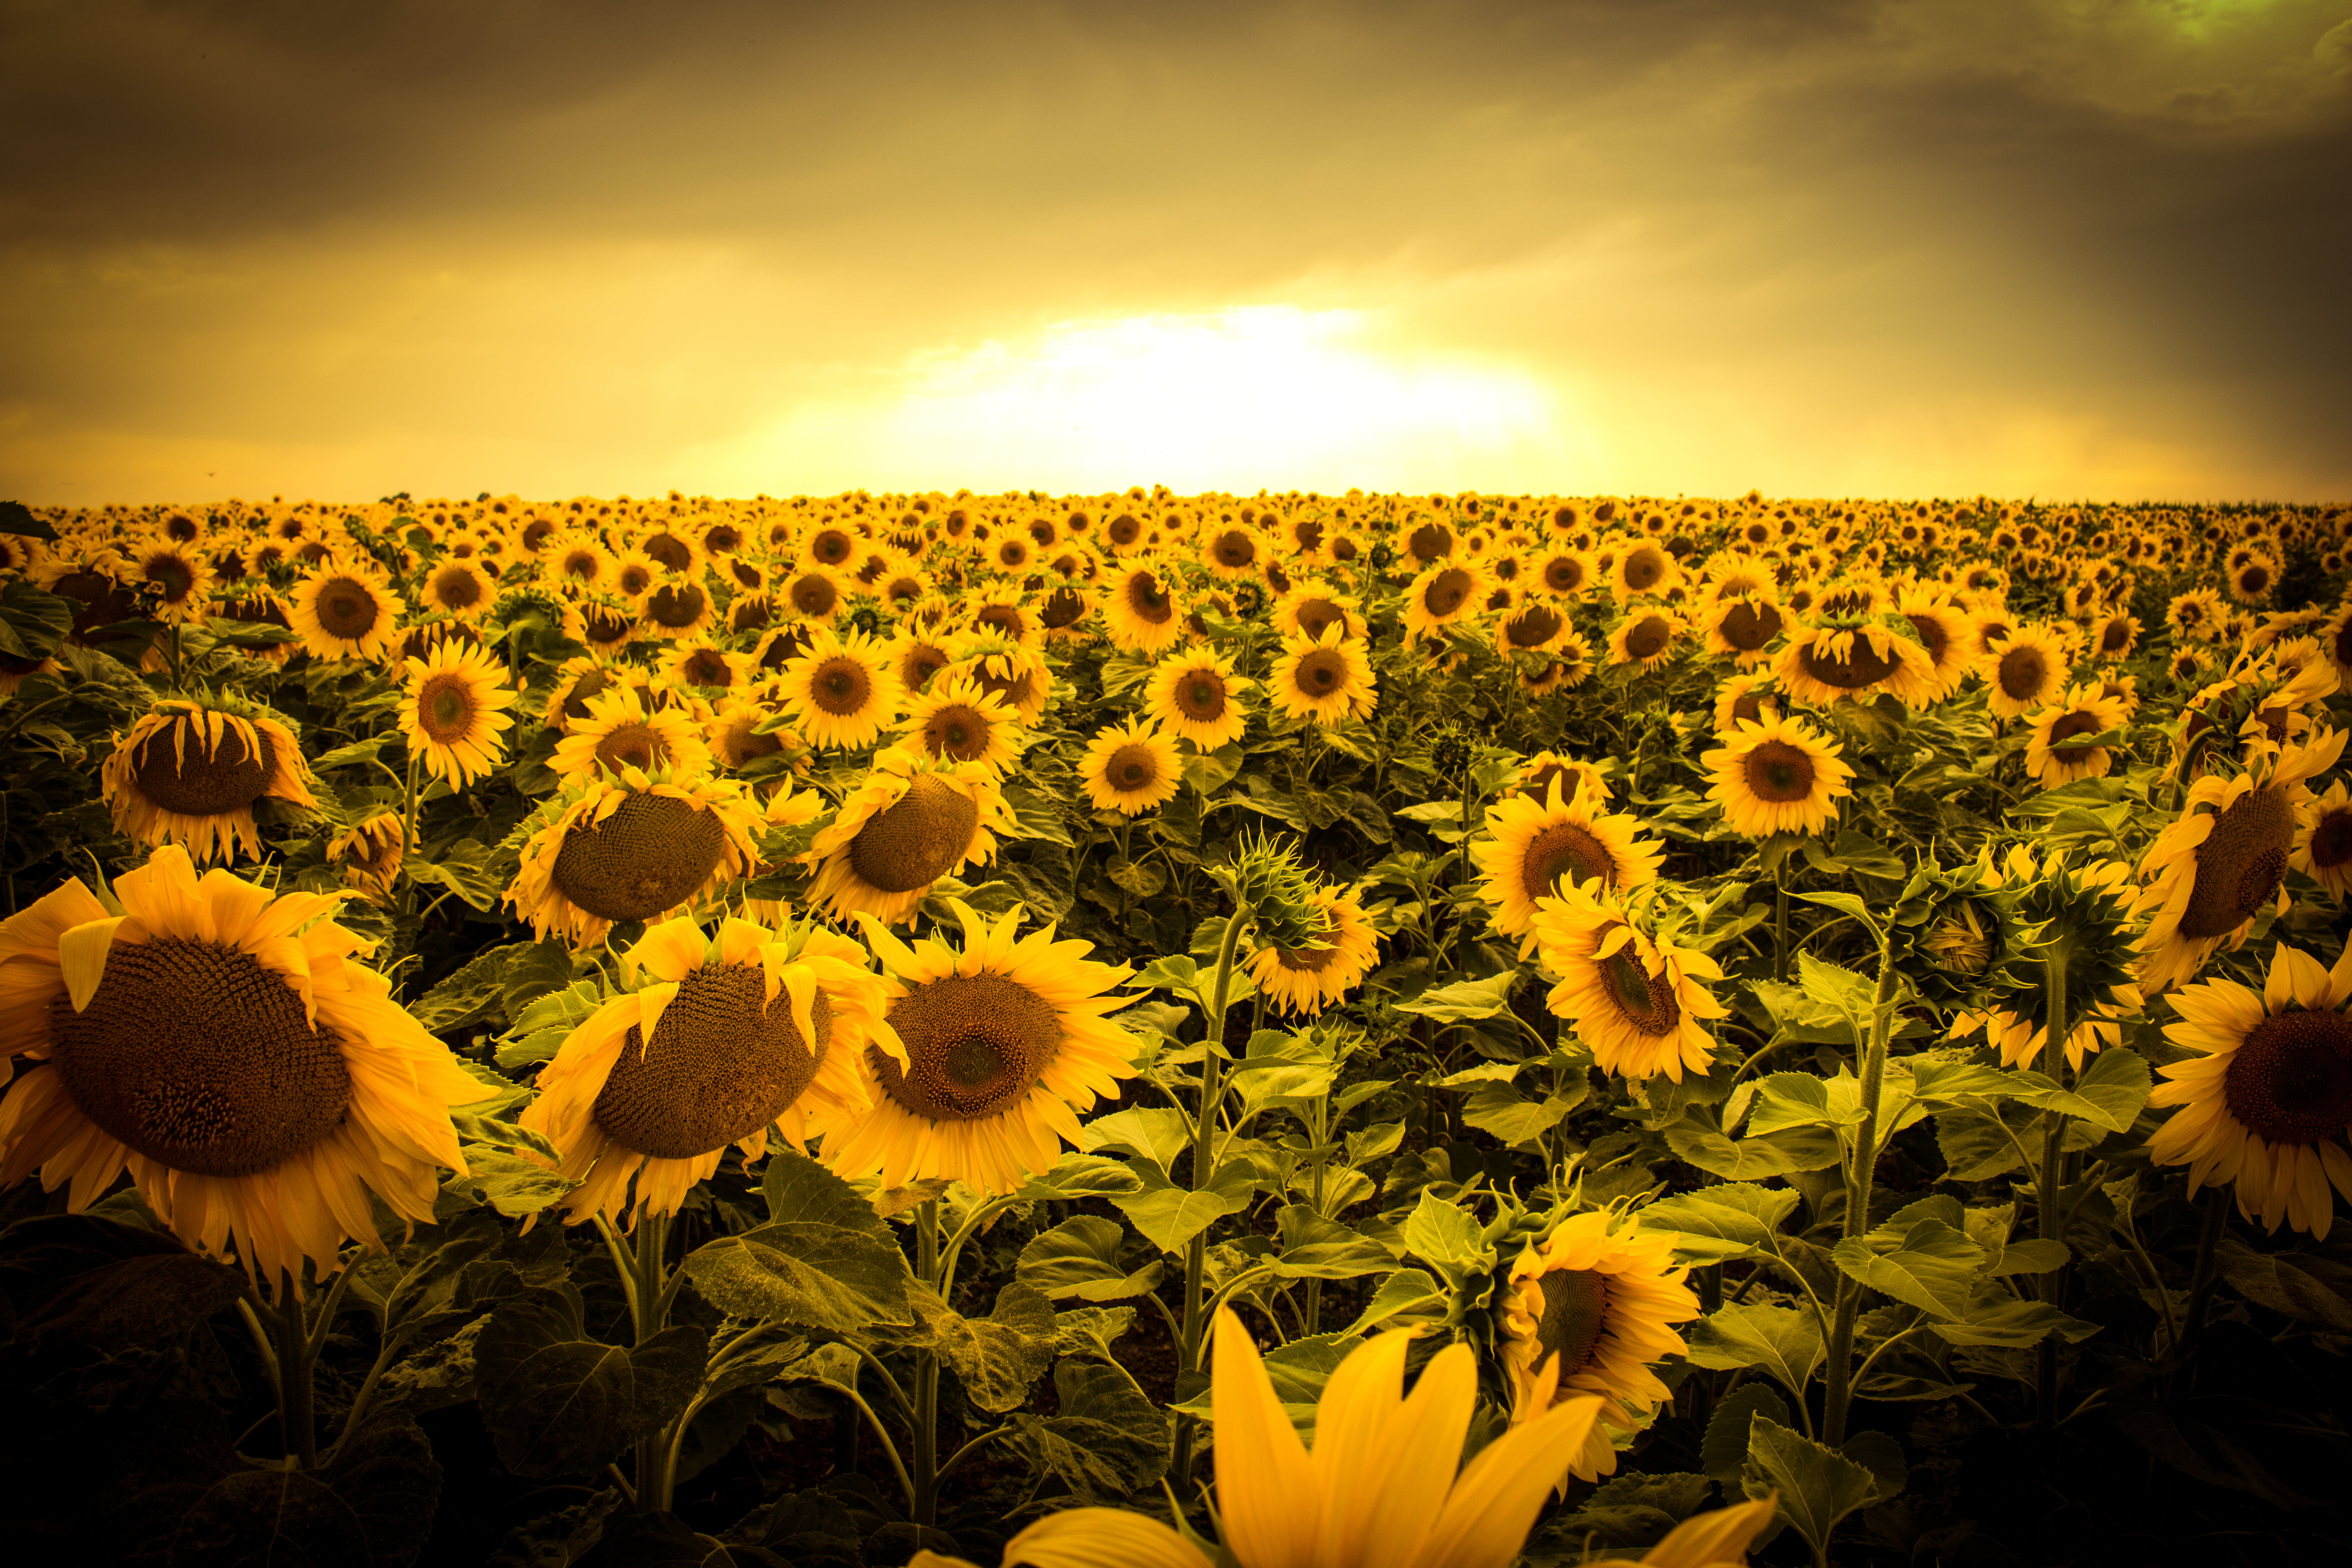 Bed of sunflowers photo in golden hour HD wallpaper | Wallpaper Flare